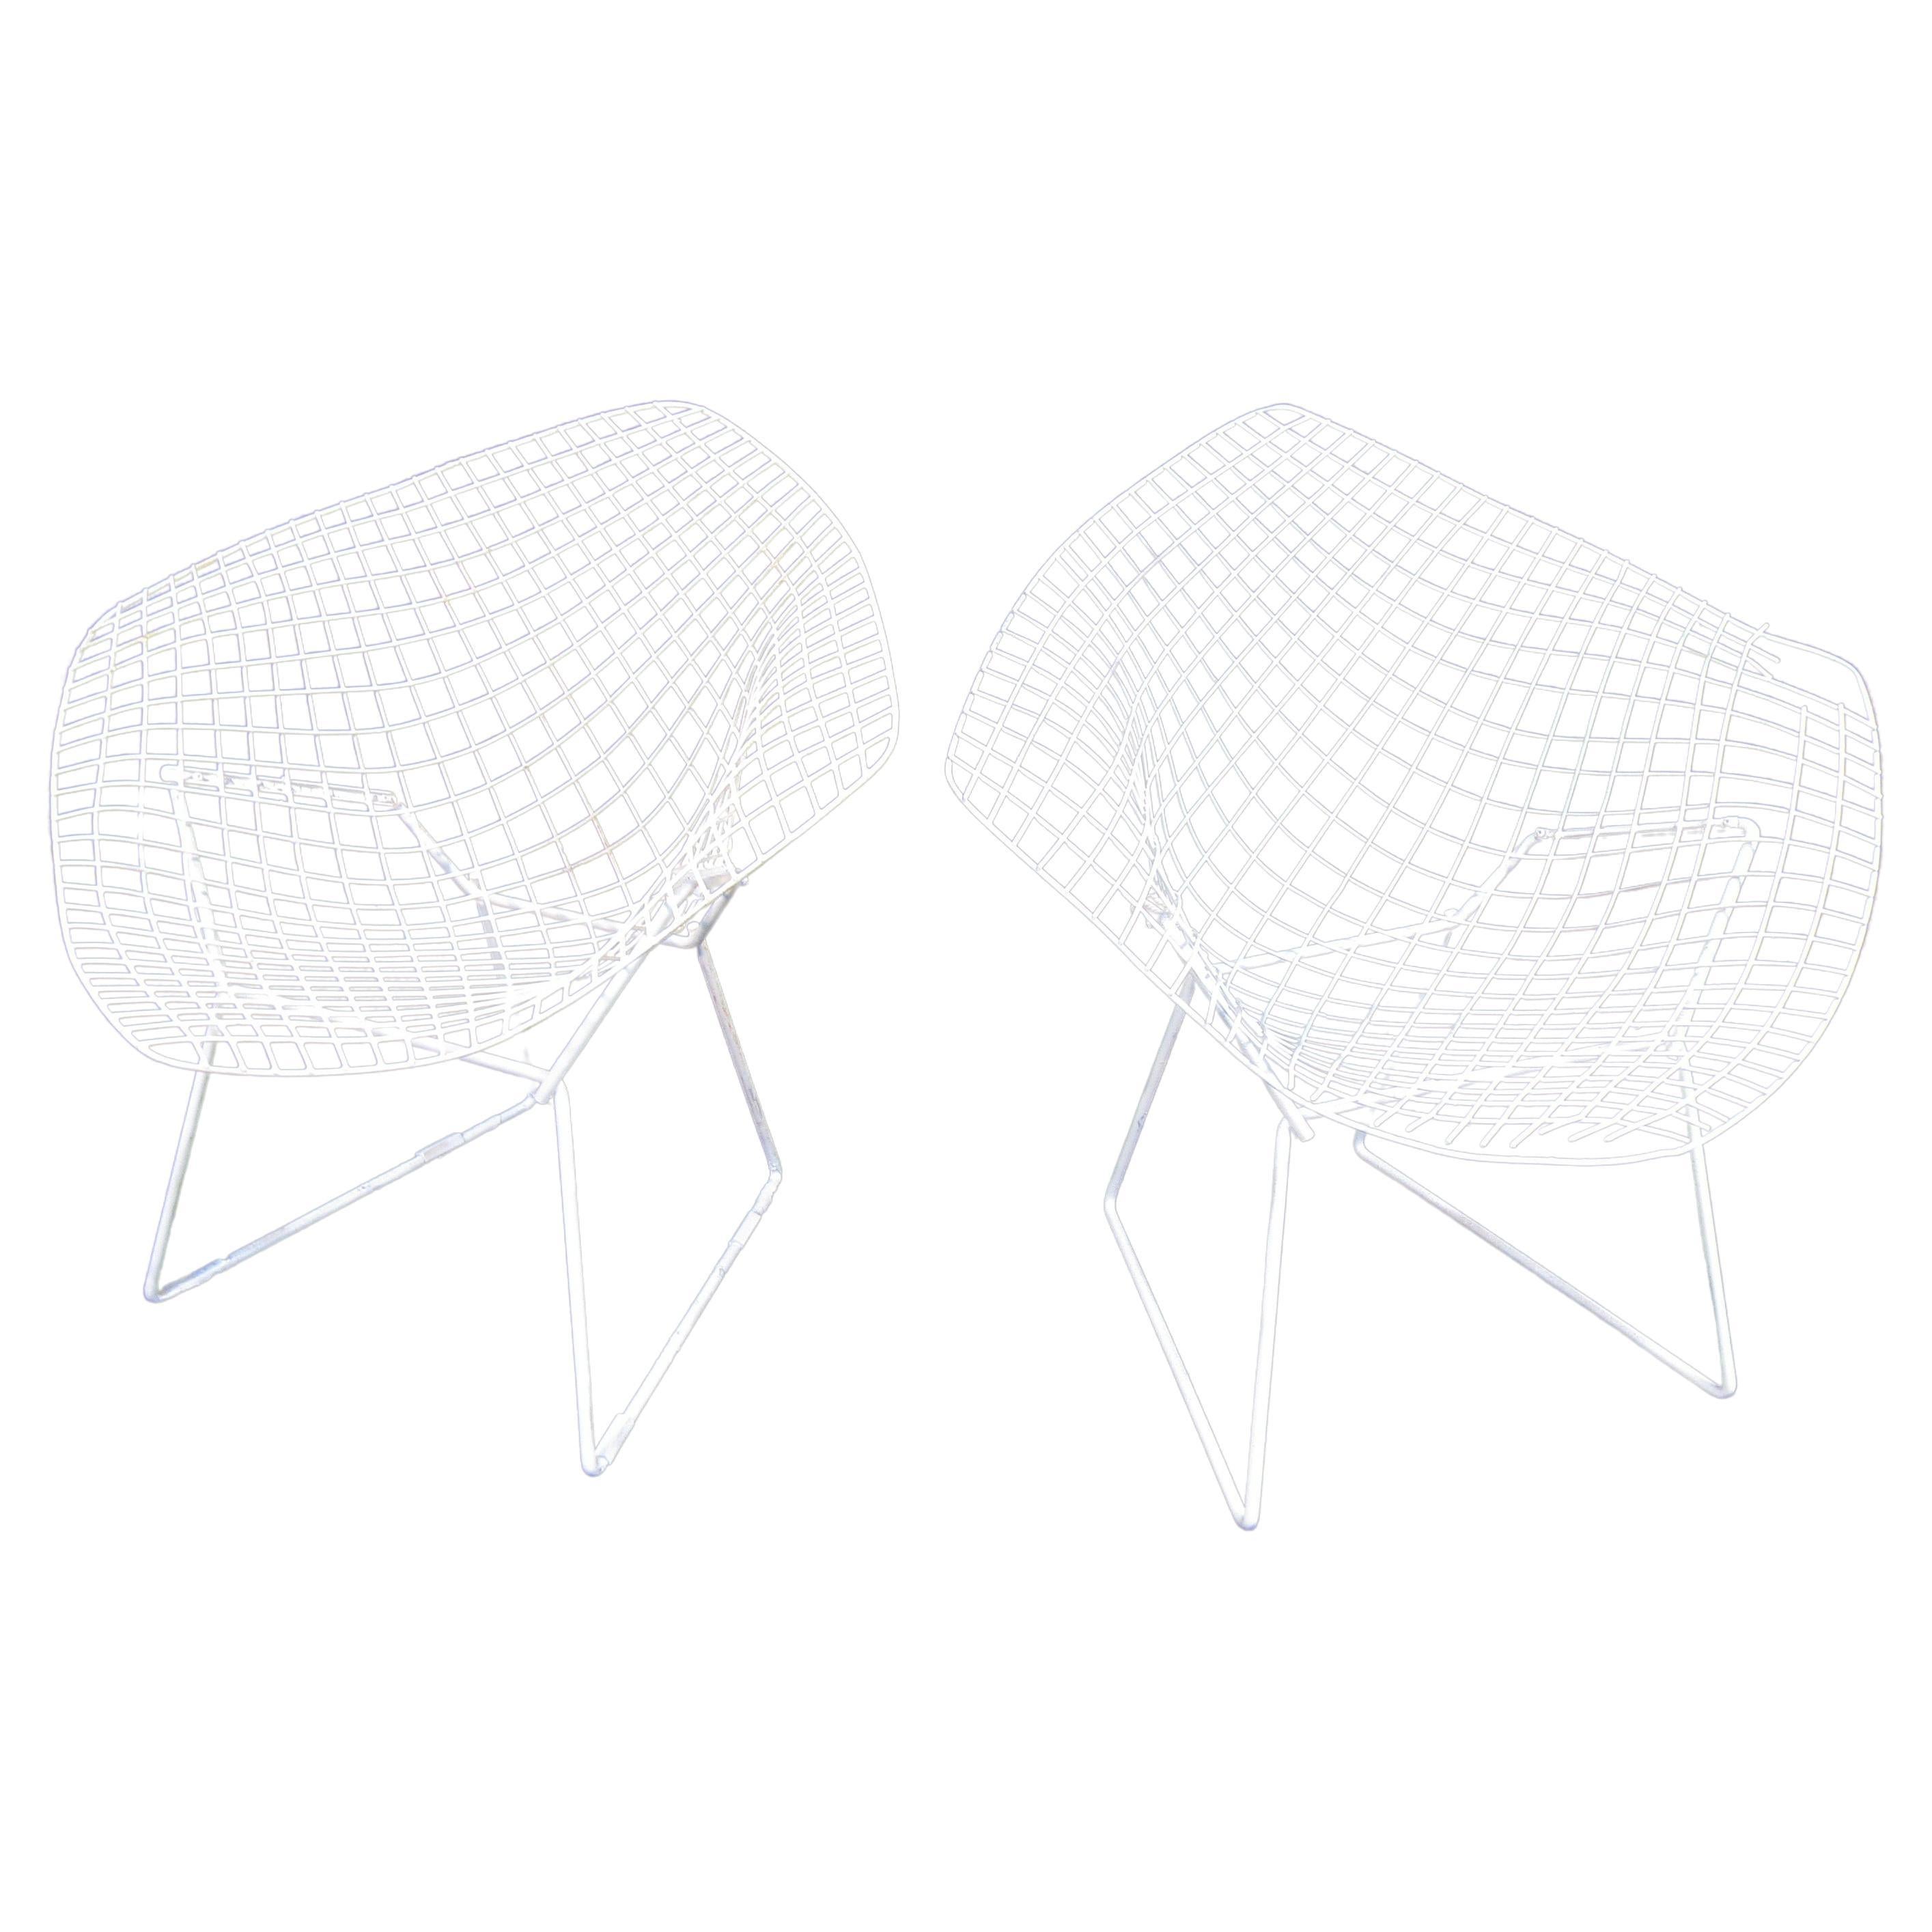 Styled after the iconic Bertoia Diamond chair, this pair of outdoor metal chairs has a unique form that is minimal and interesting. Perfect for any patio, balcony, or outdoor space. Please confirm item location with seller (NY/NJ).